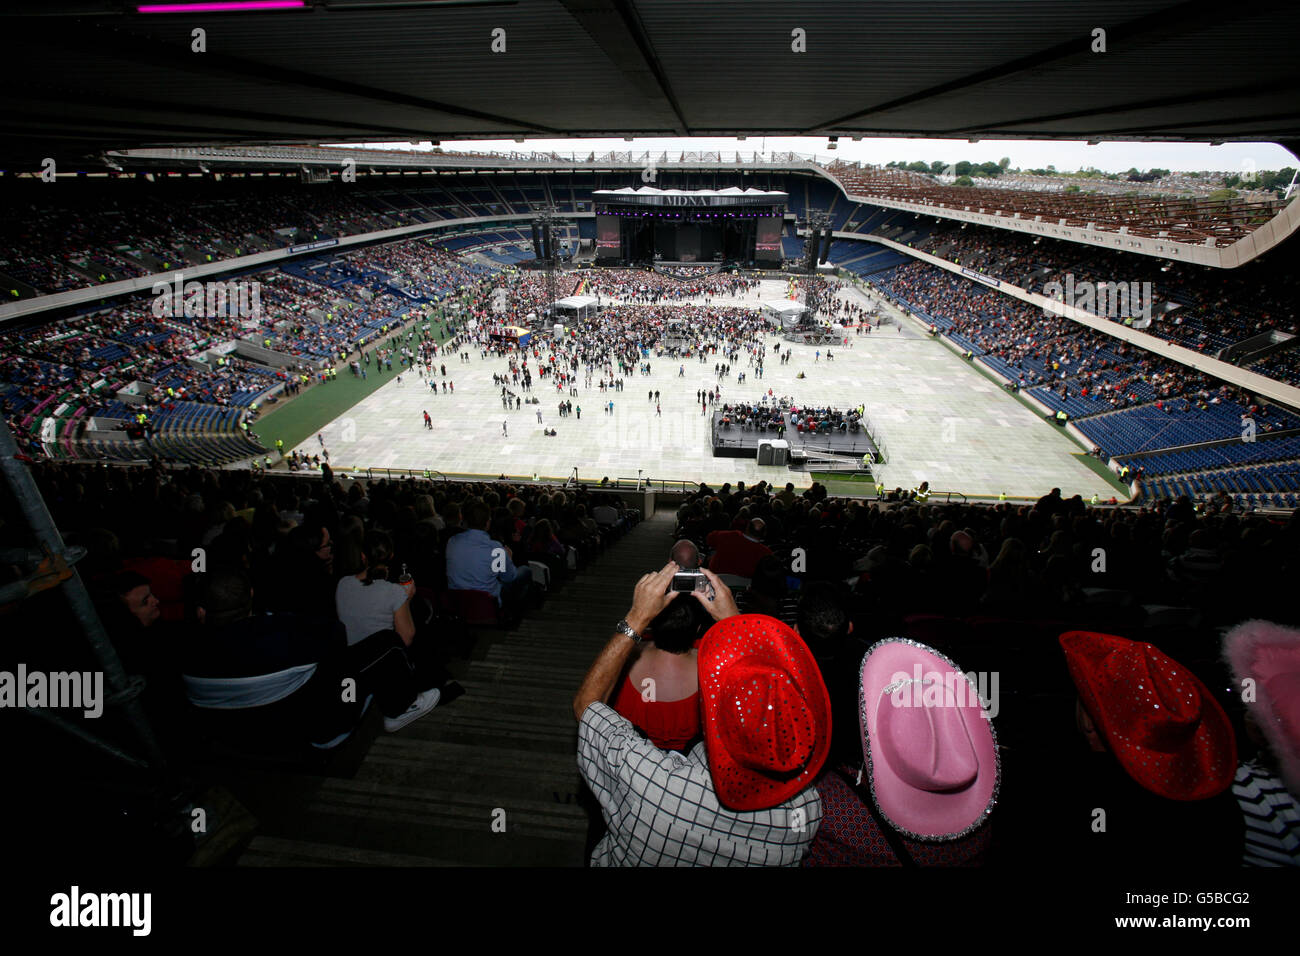 Madonna in concert, Edinburgh. Madonna fans at fill up the Stadium bowl at Murrayfield Stock Photo